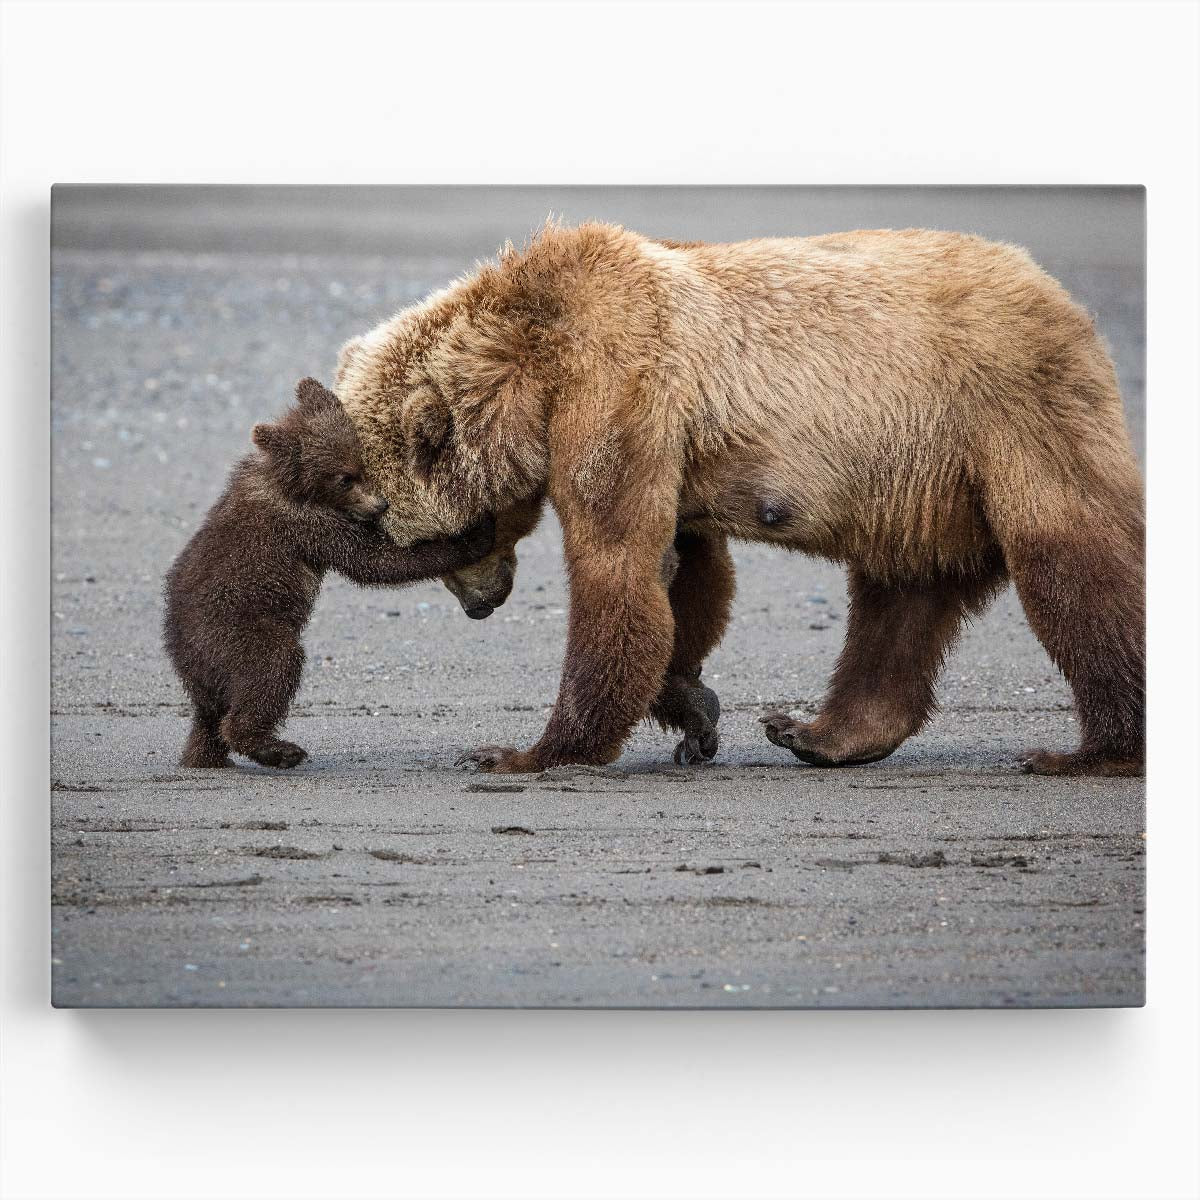 Alaskan Brown Bear Family Embrace Wall Art by Luxuriance Designs. Made in USA.